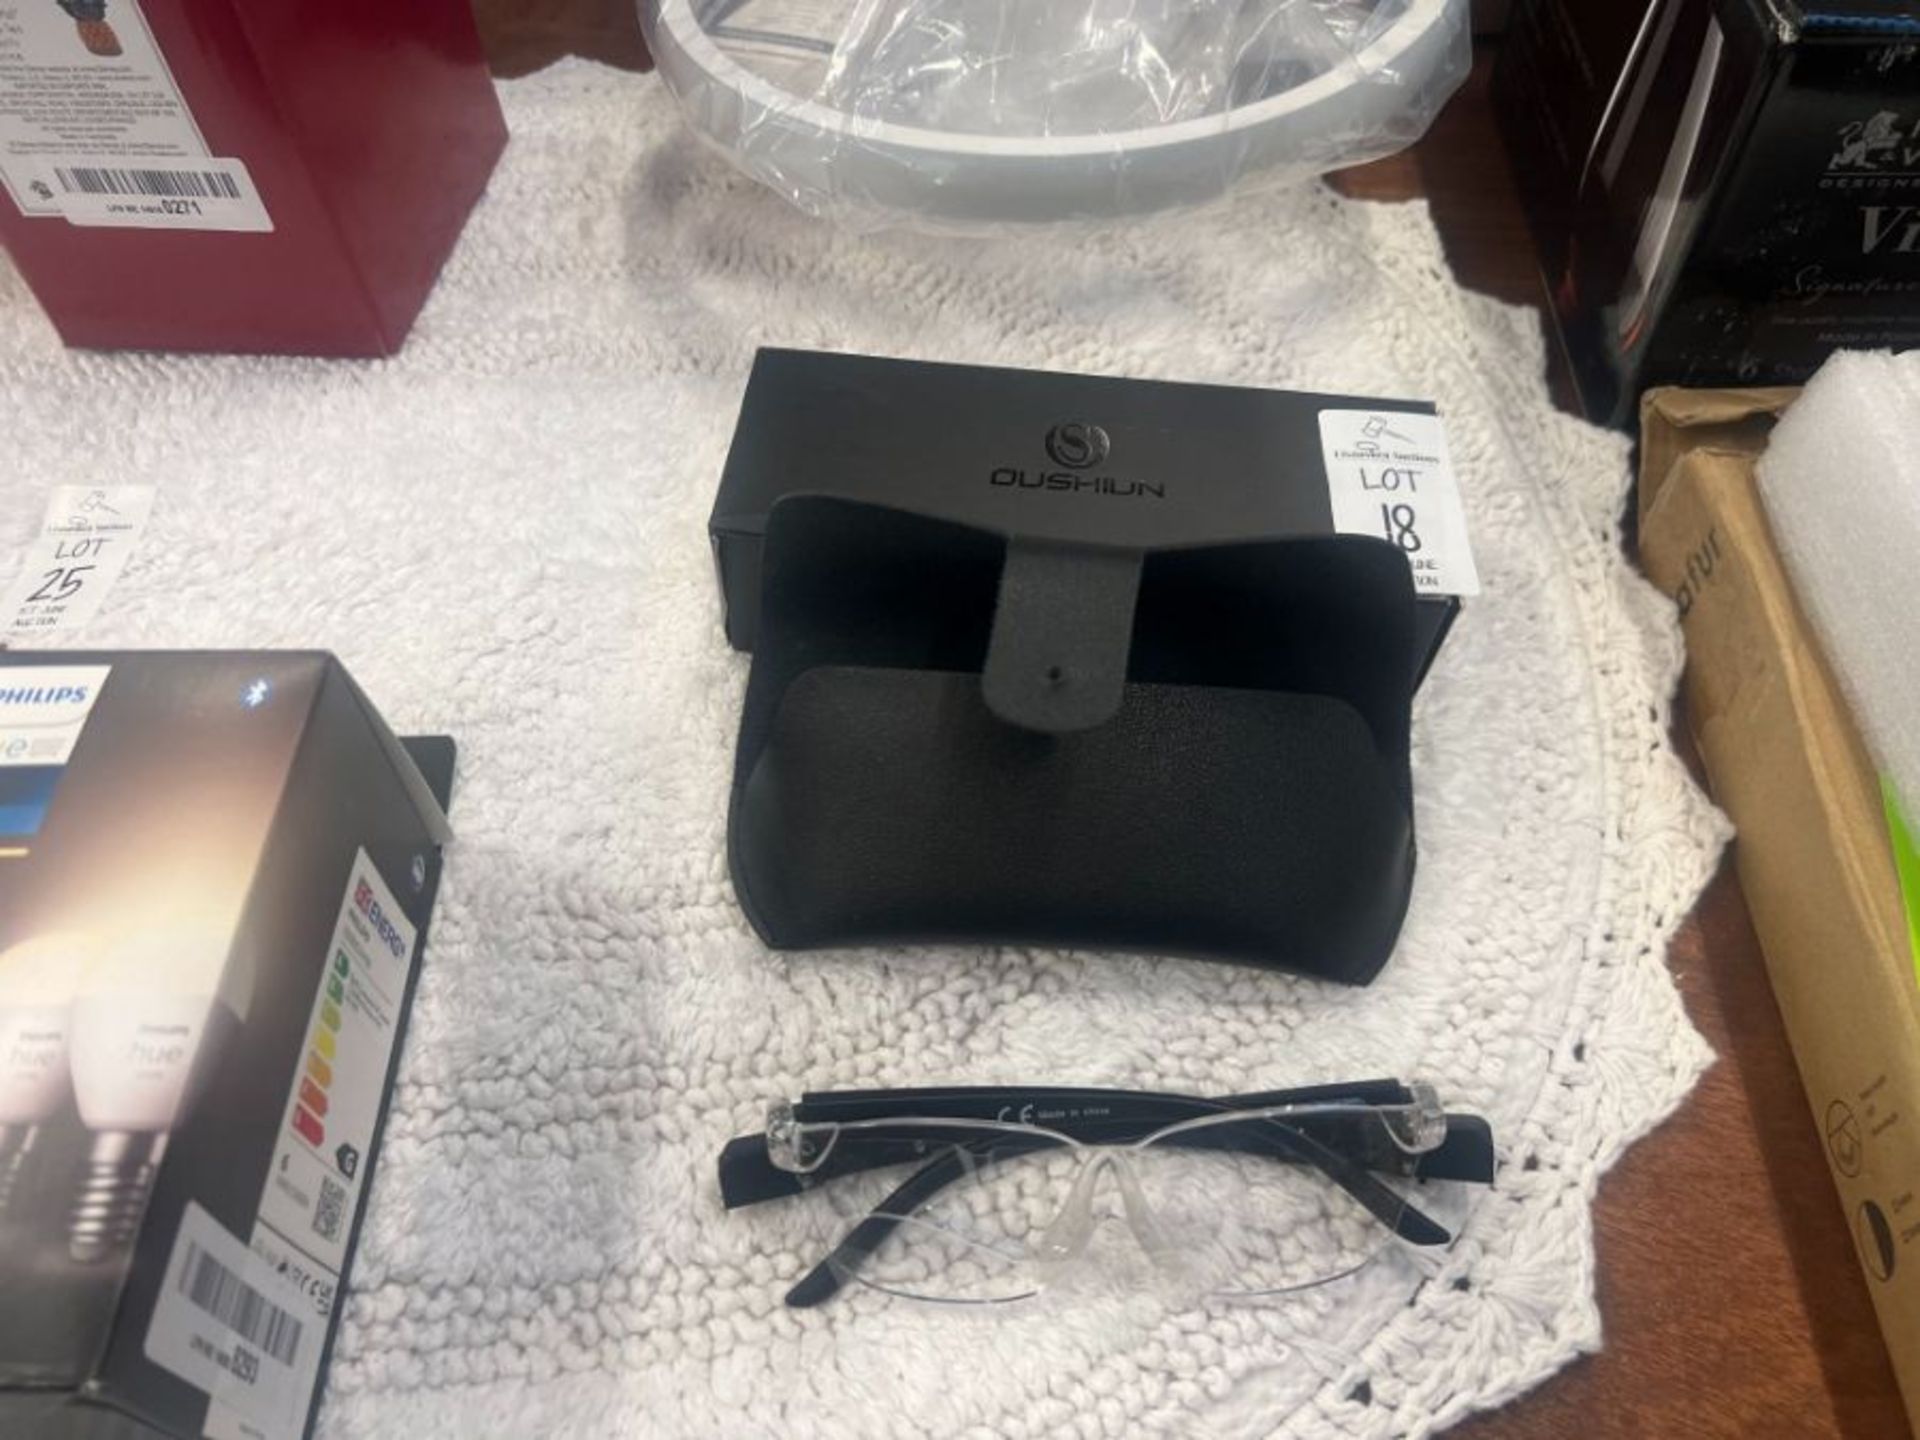 OUSHIUN LED POWERED GLASSES WITH CASE